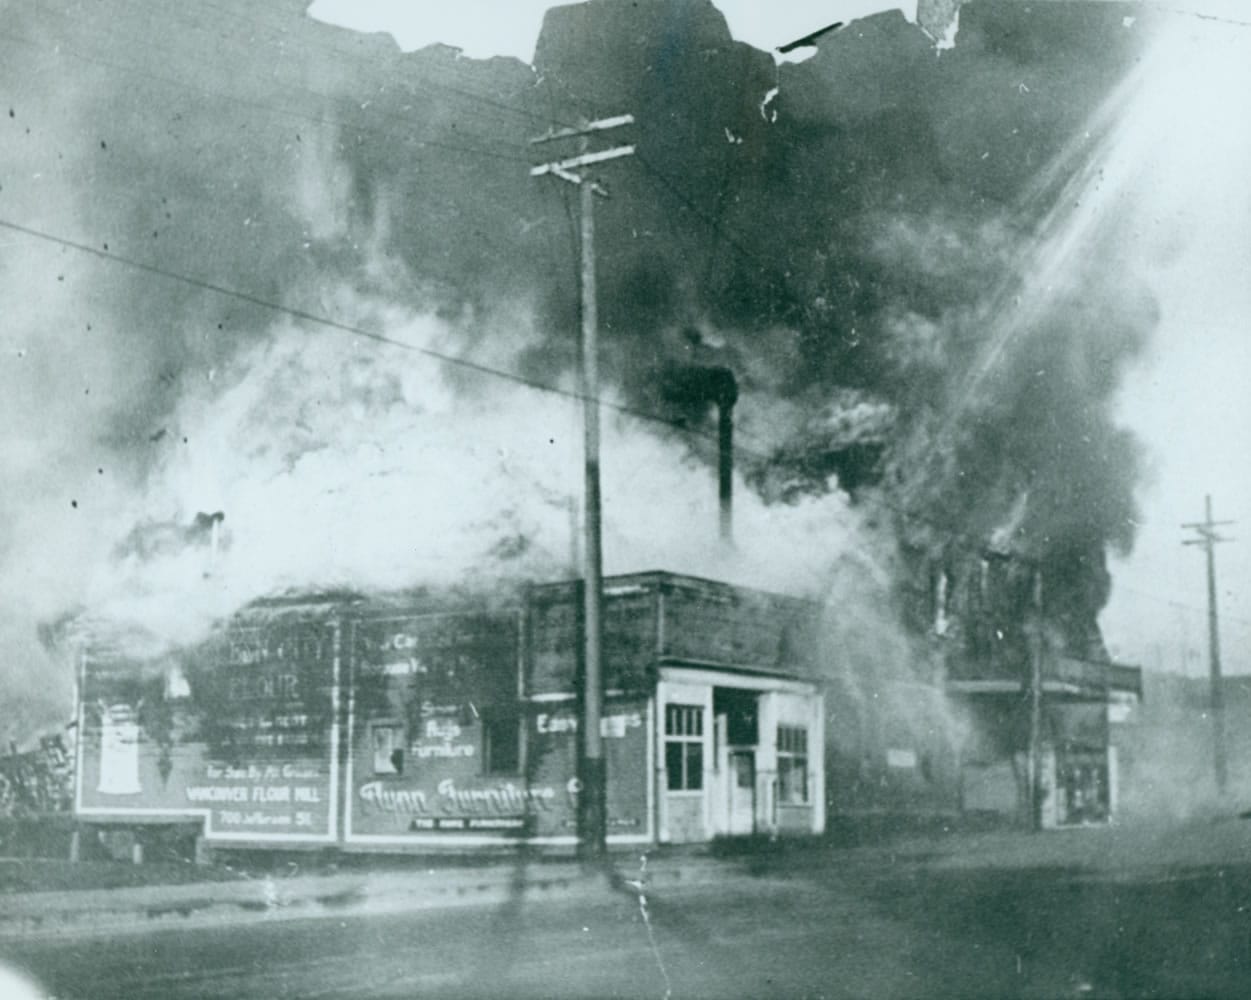 A massive fire at an old and untended building burnt down in 1913.